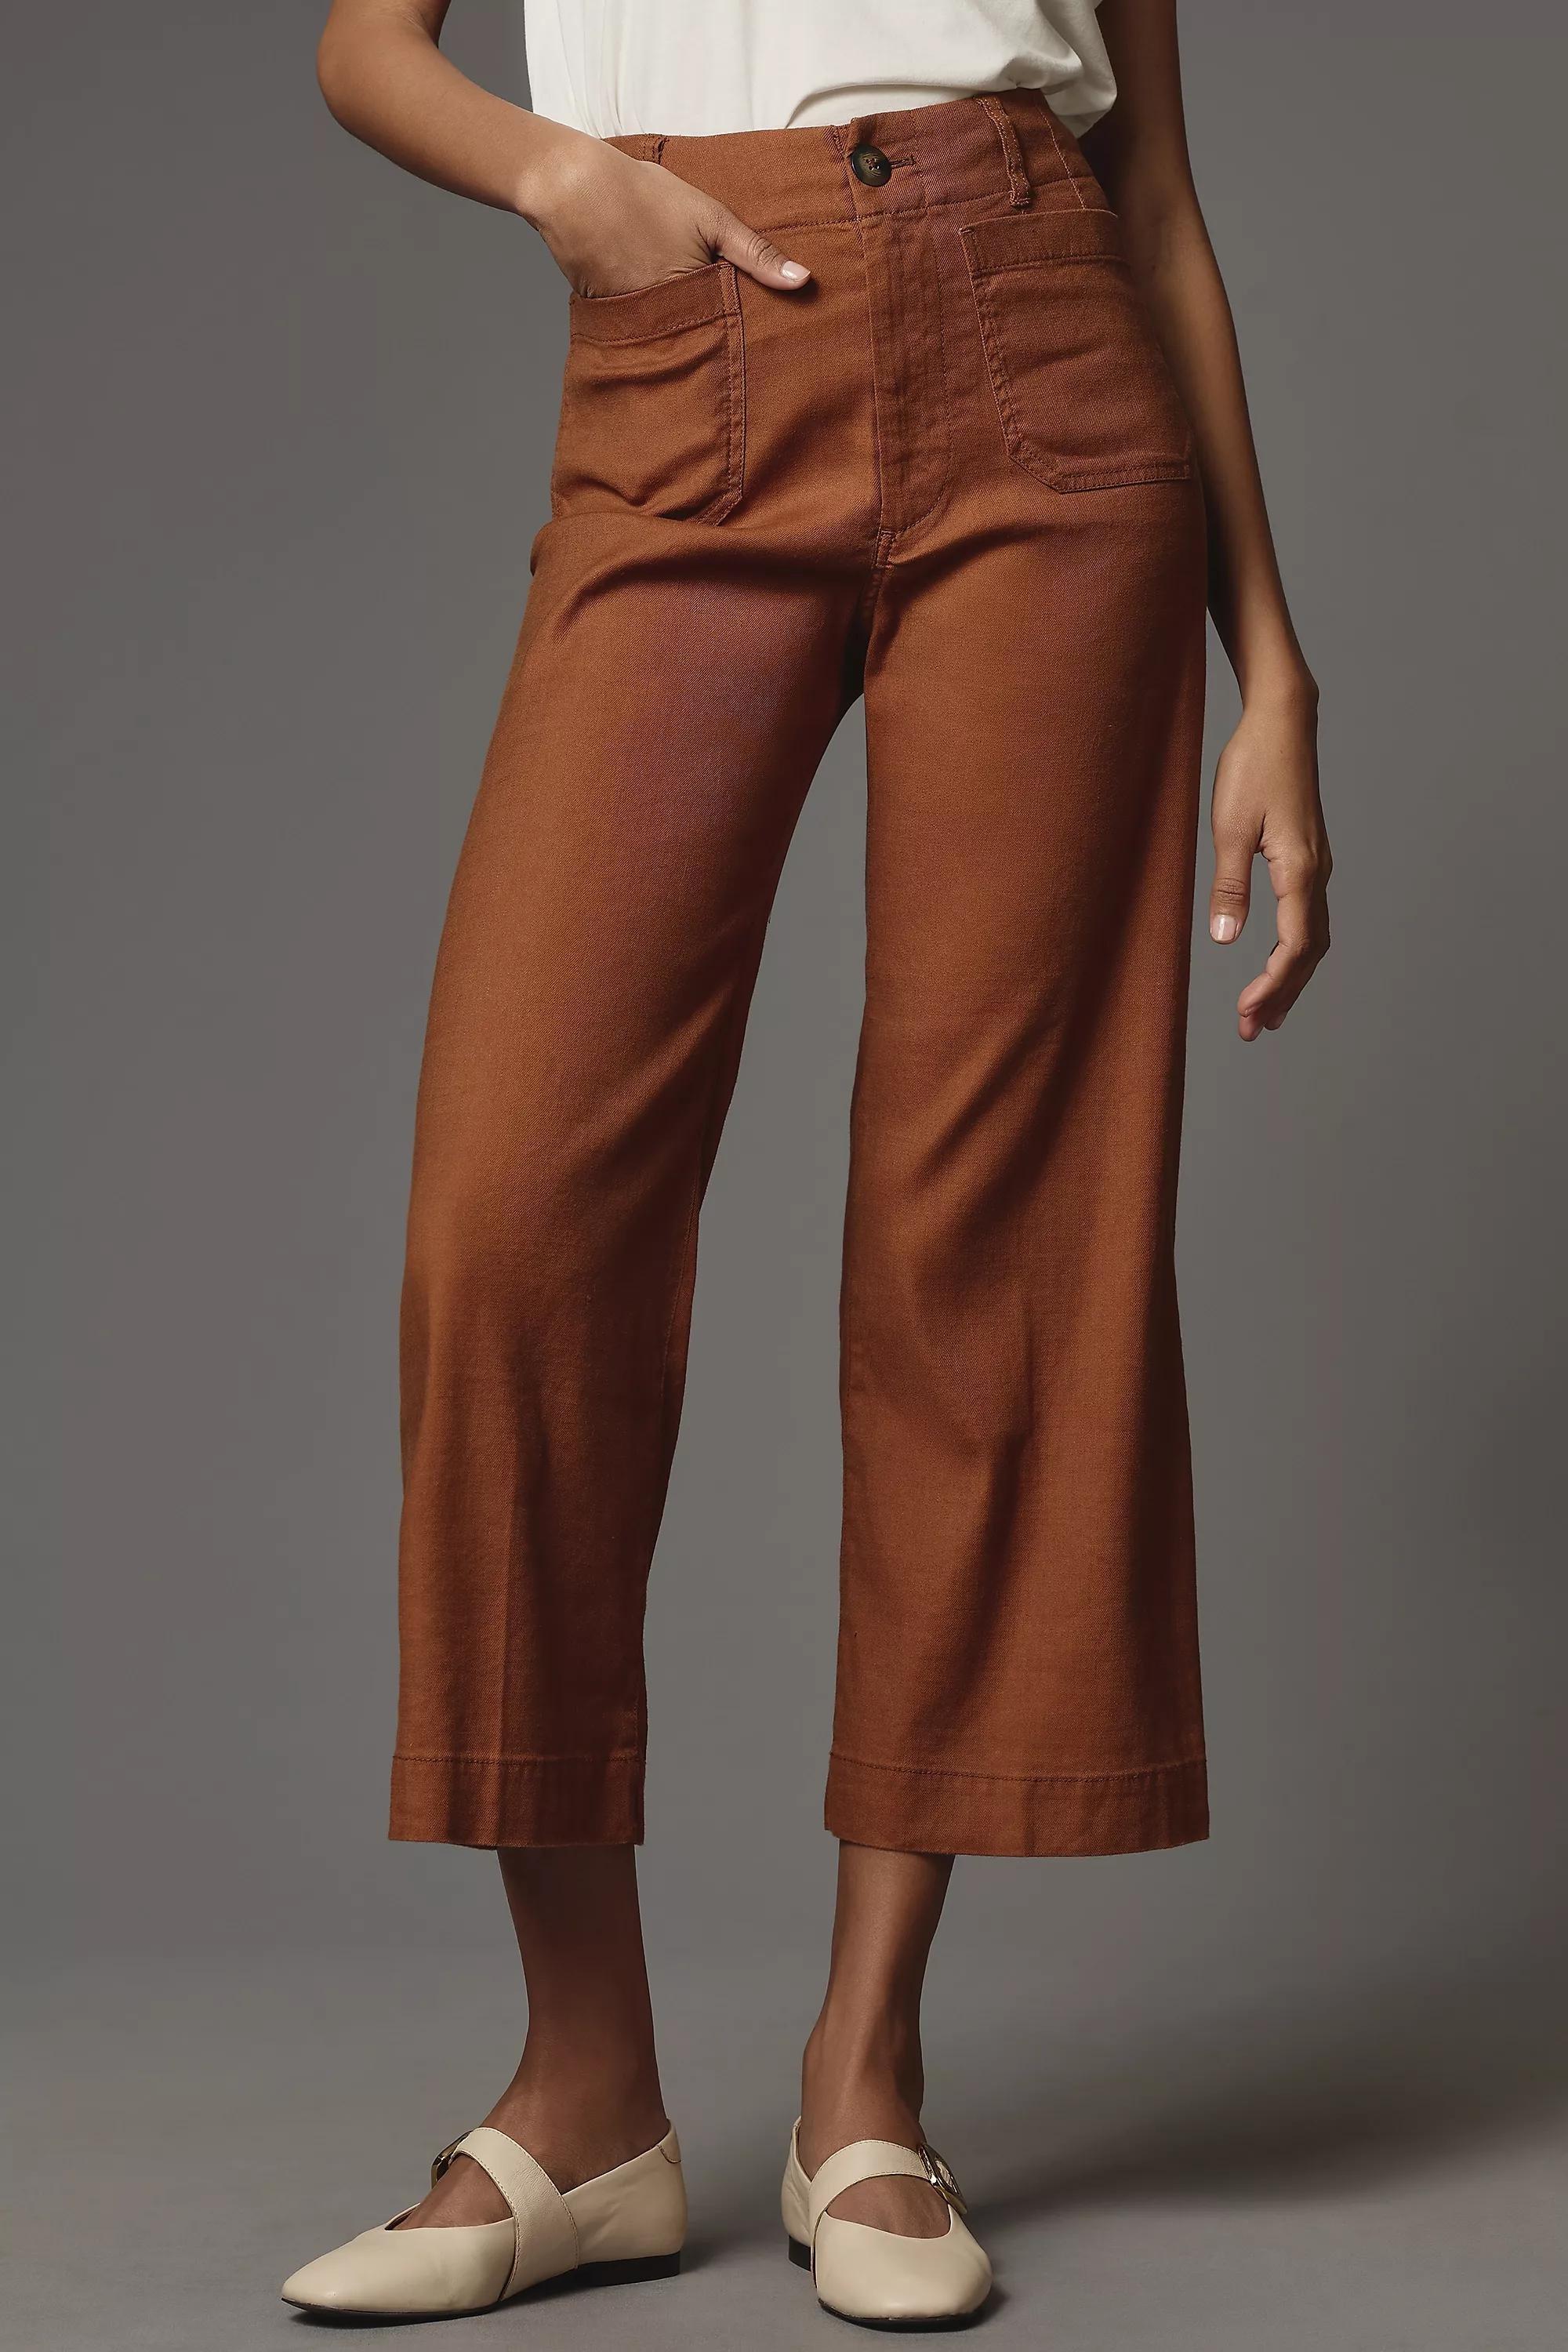 Anthropologie - Maeve The Colette Cropped Wide-Leg Linen Trousers, Brown